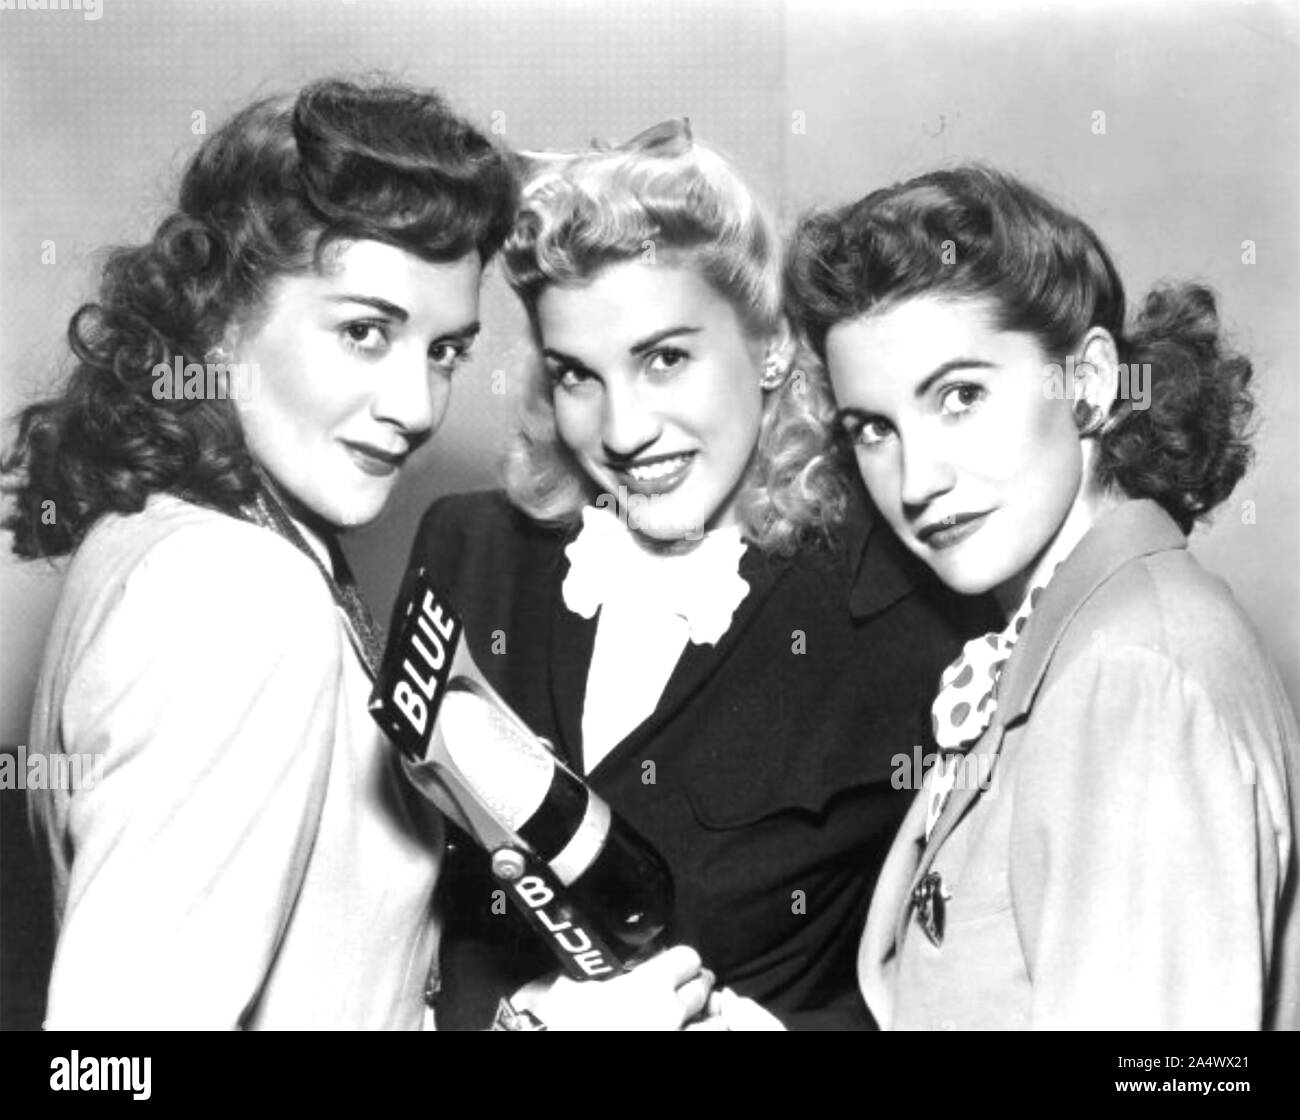 THE ANDREWS SISTERS American close harmony group about 1945. From left: LaVerne,Patty, Maxene. Stock Photo